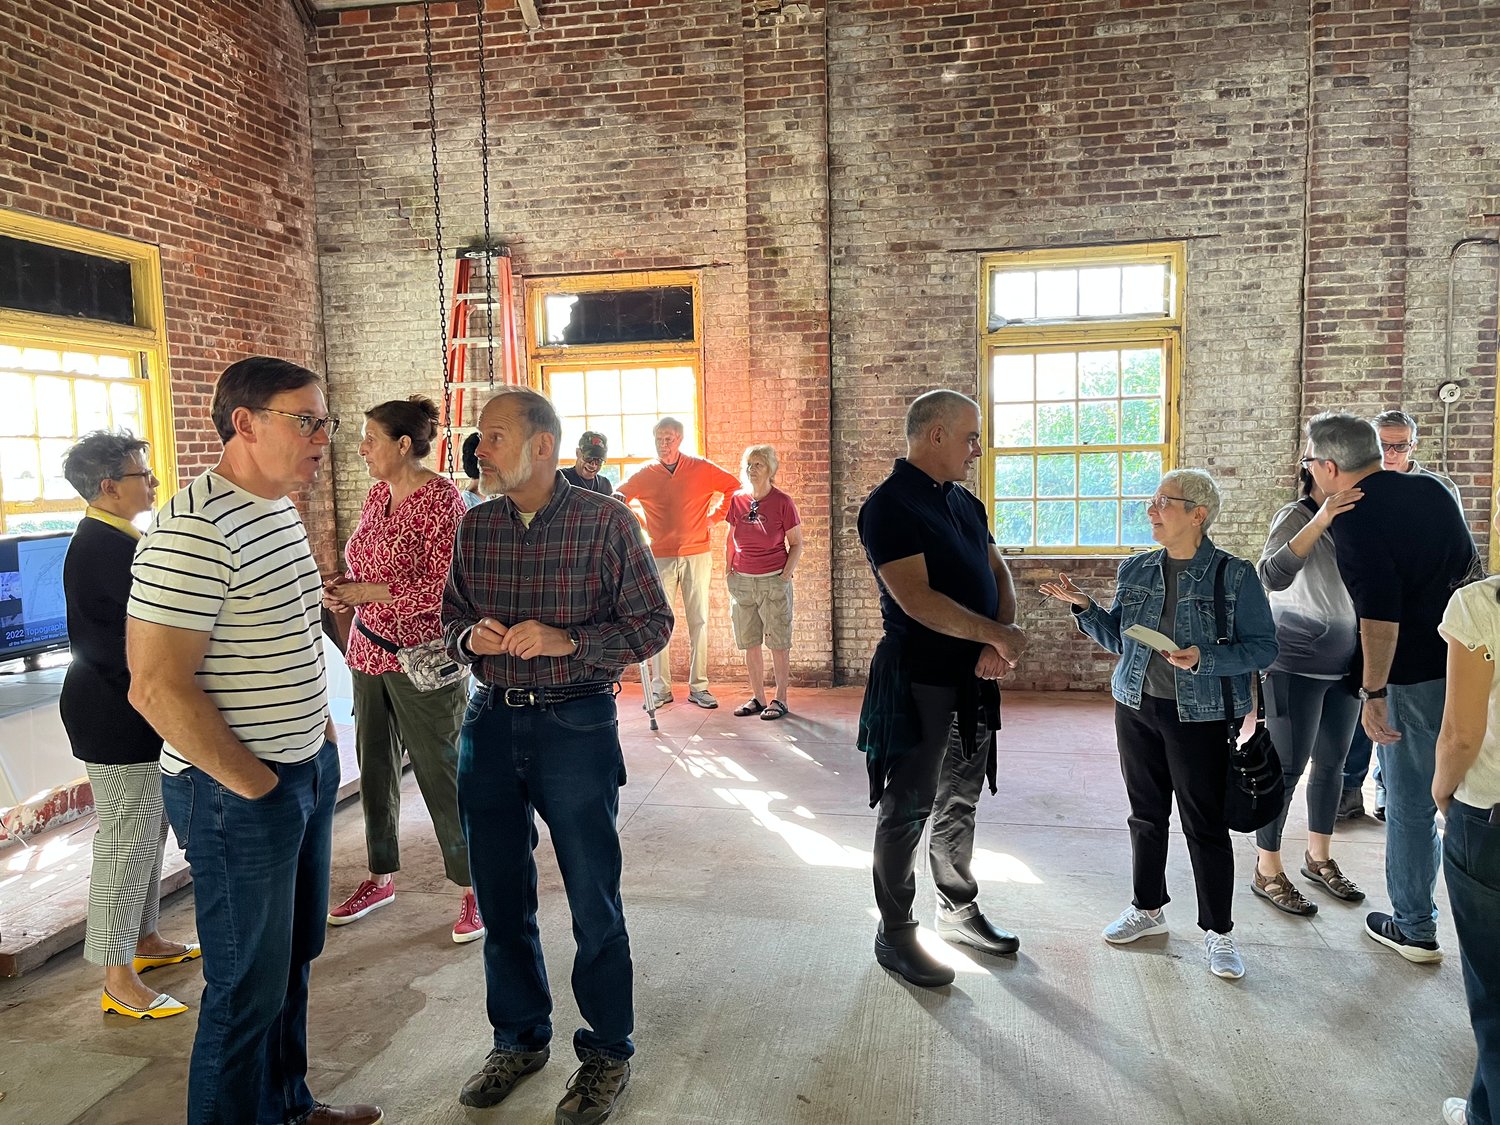 Dozens of community members came out Saturday to view the space at 325 Prospect Avenue.